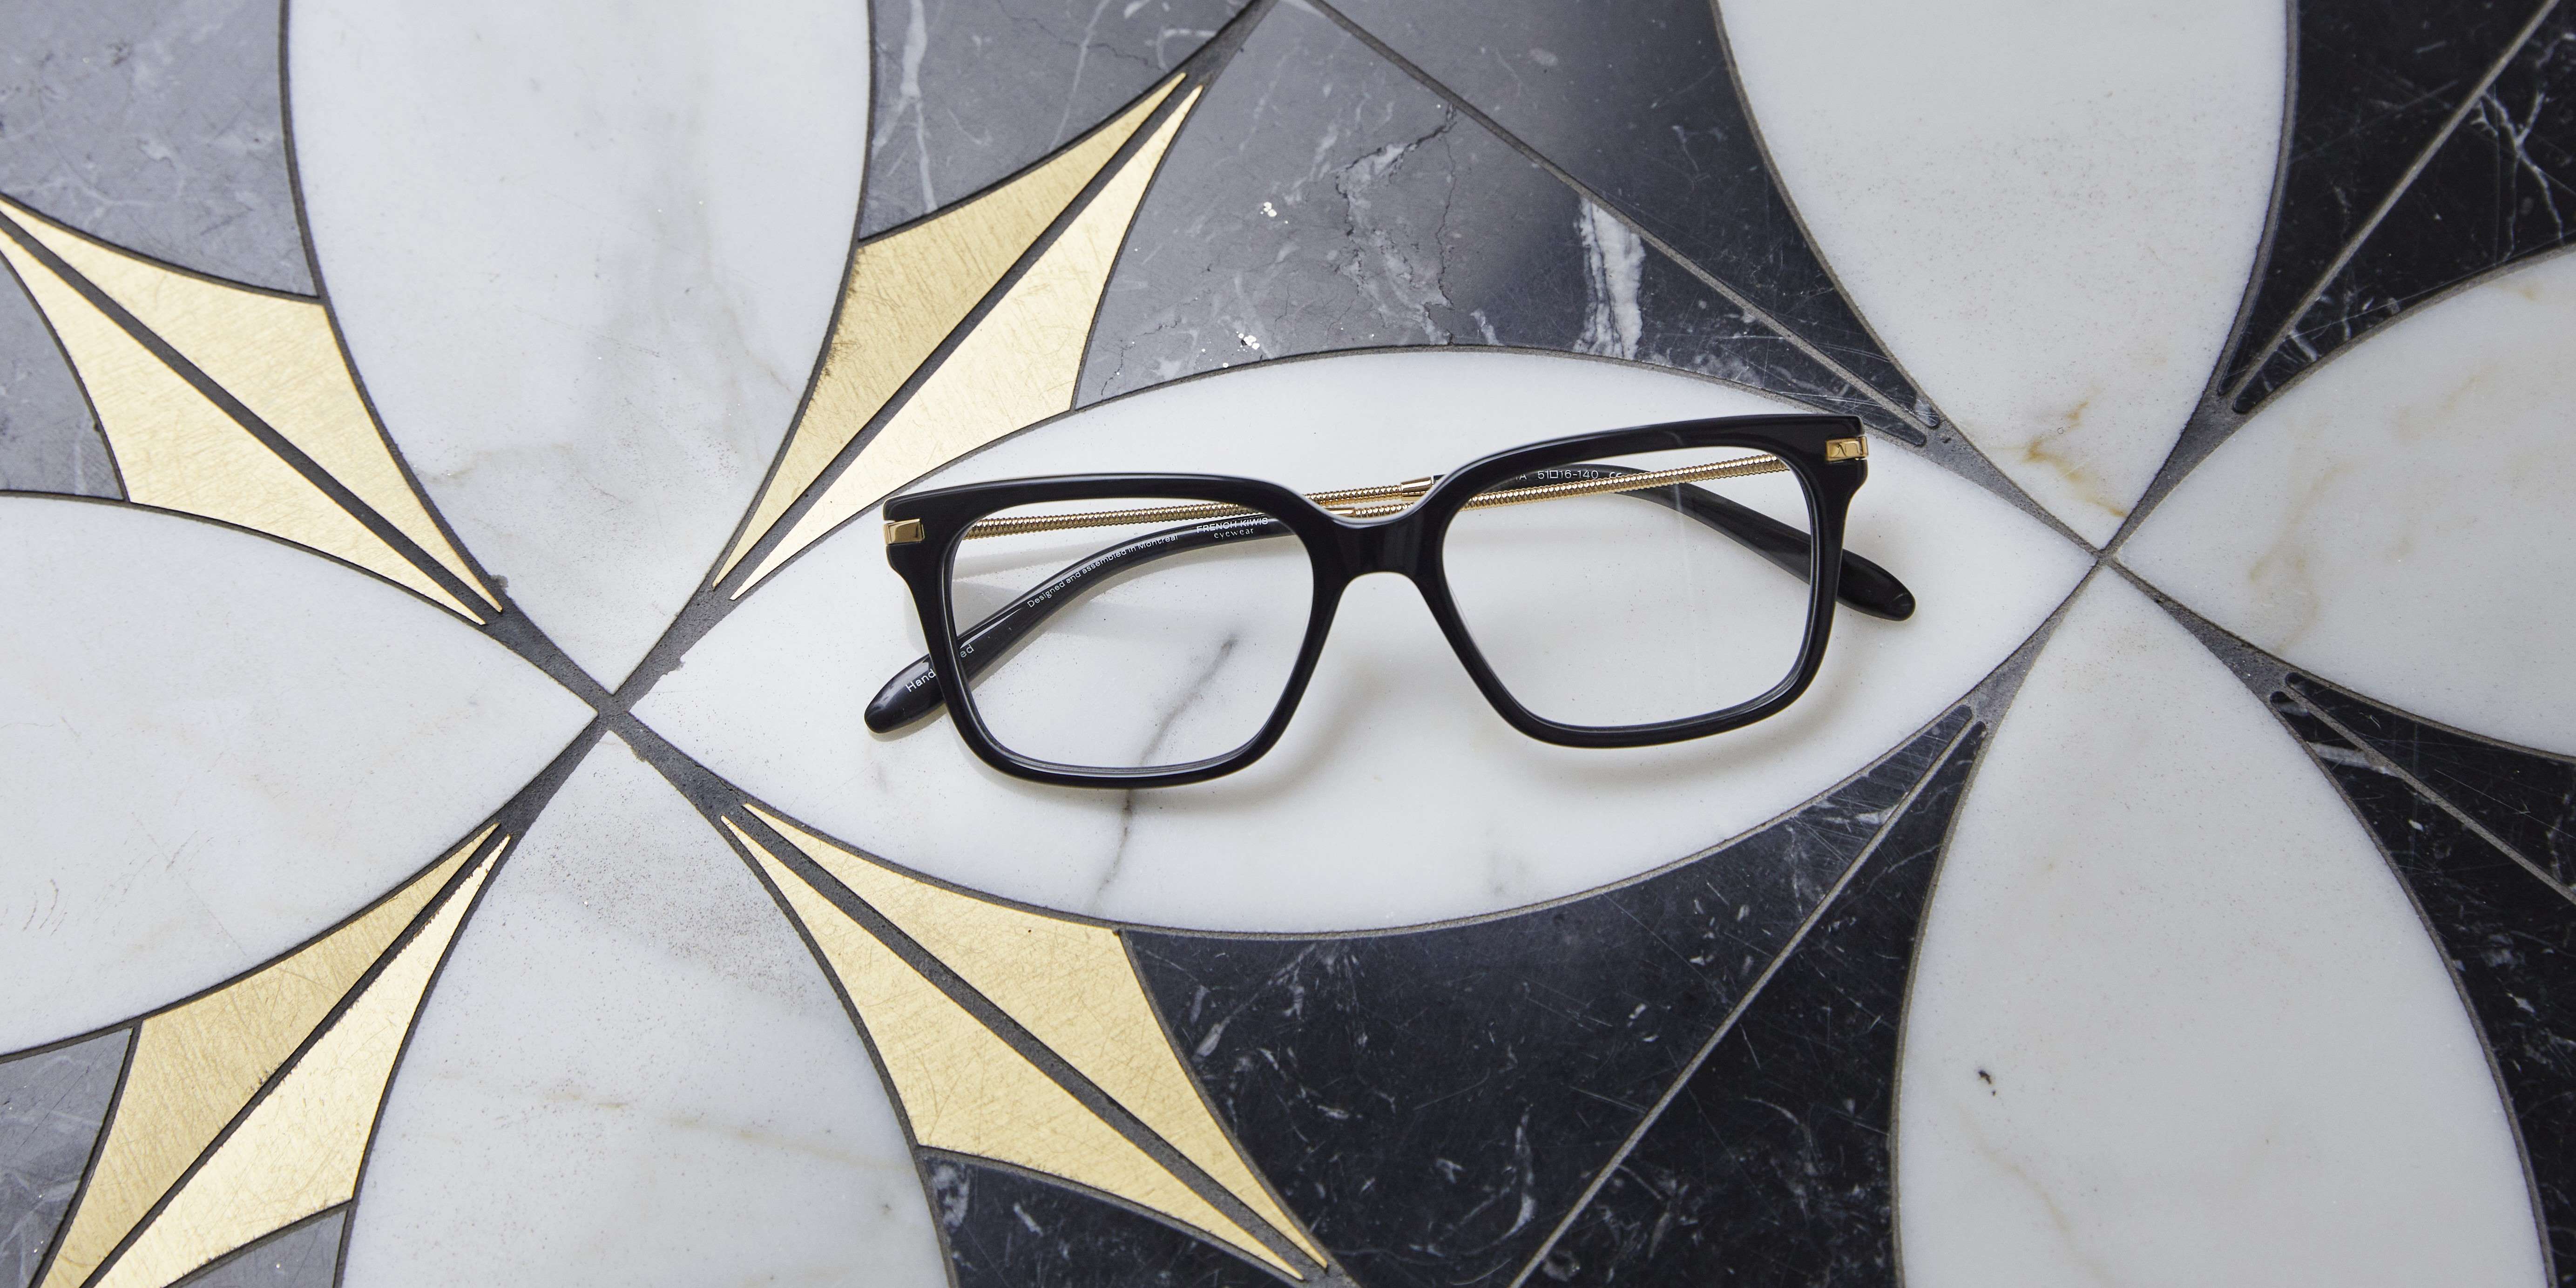 Photo Details of Sasha Onyx Reading Glasses in a room